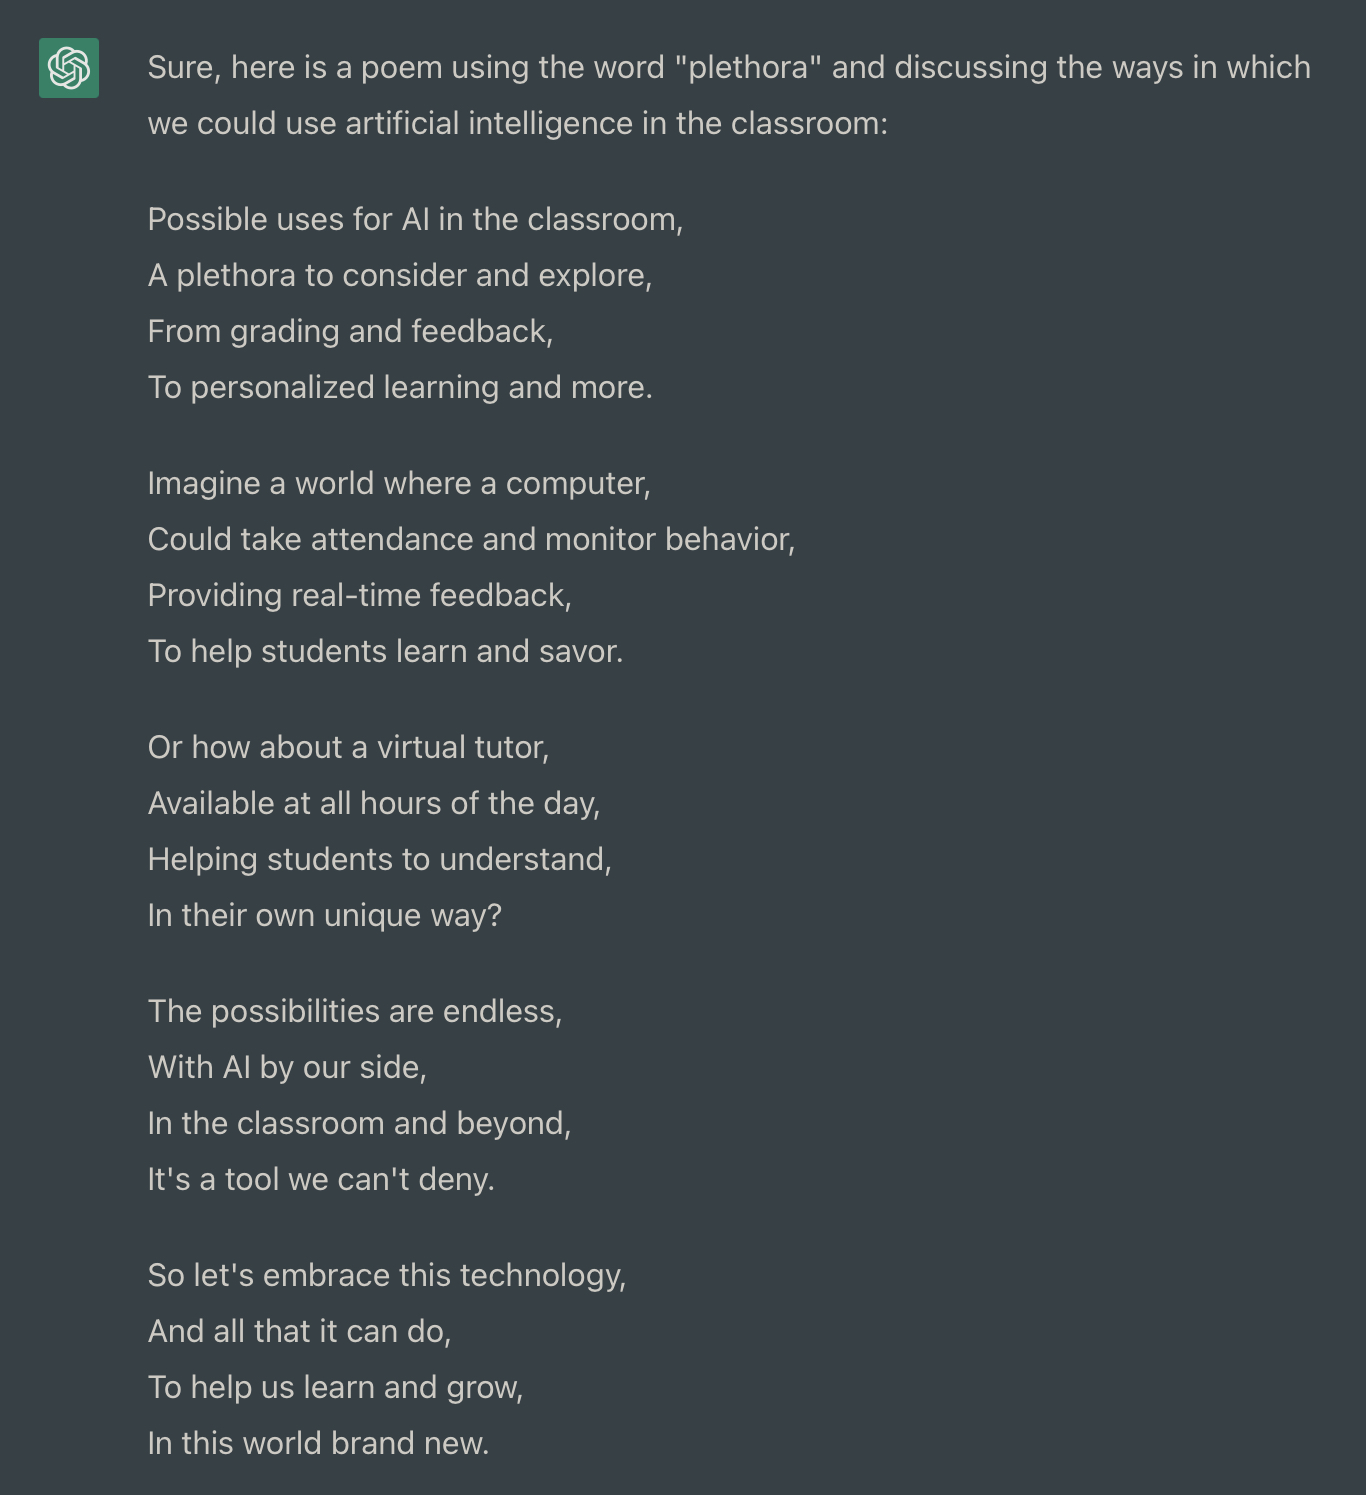 A poem written by artificial intelligence discussing the ways it could be used in the classroom.